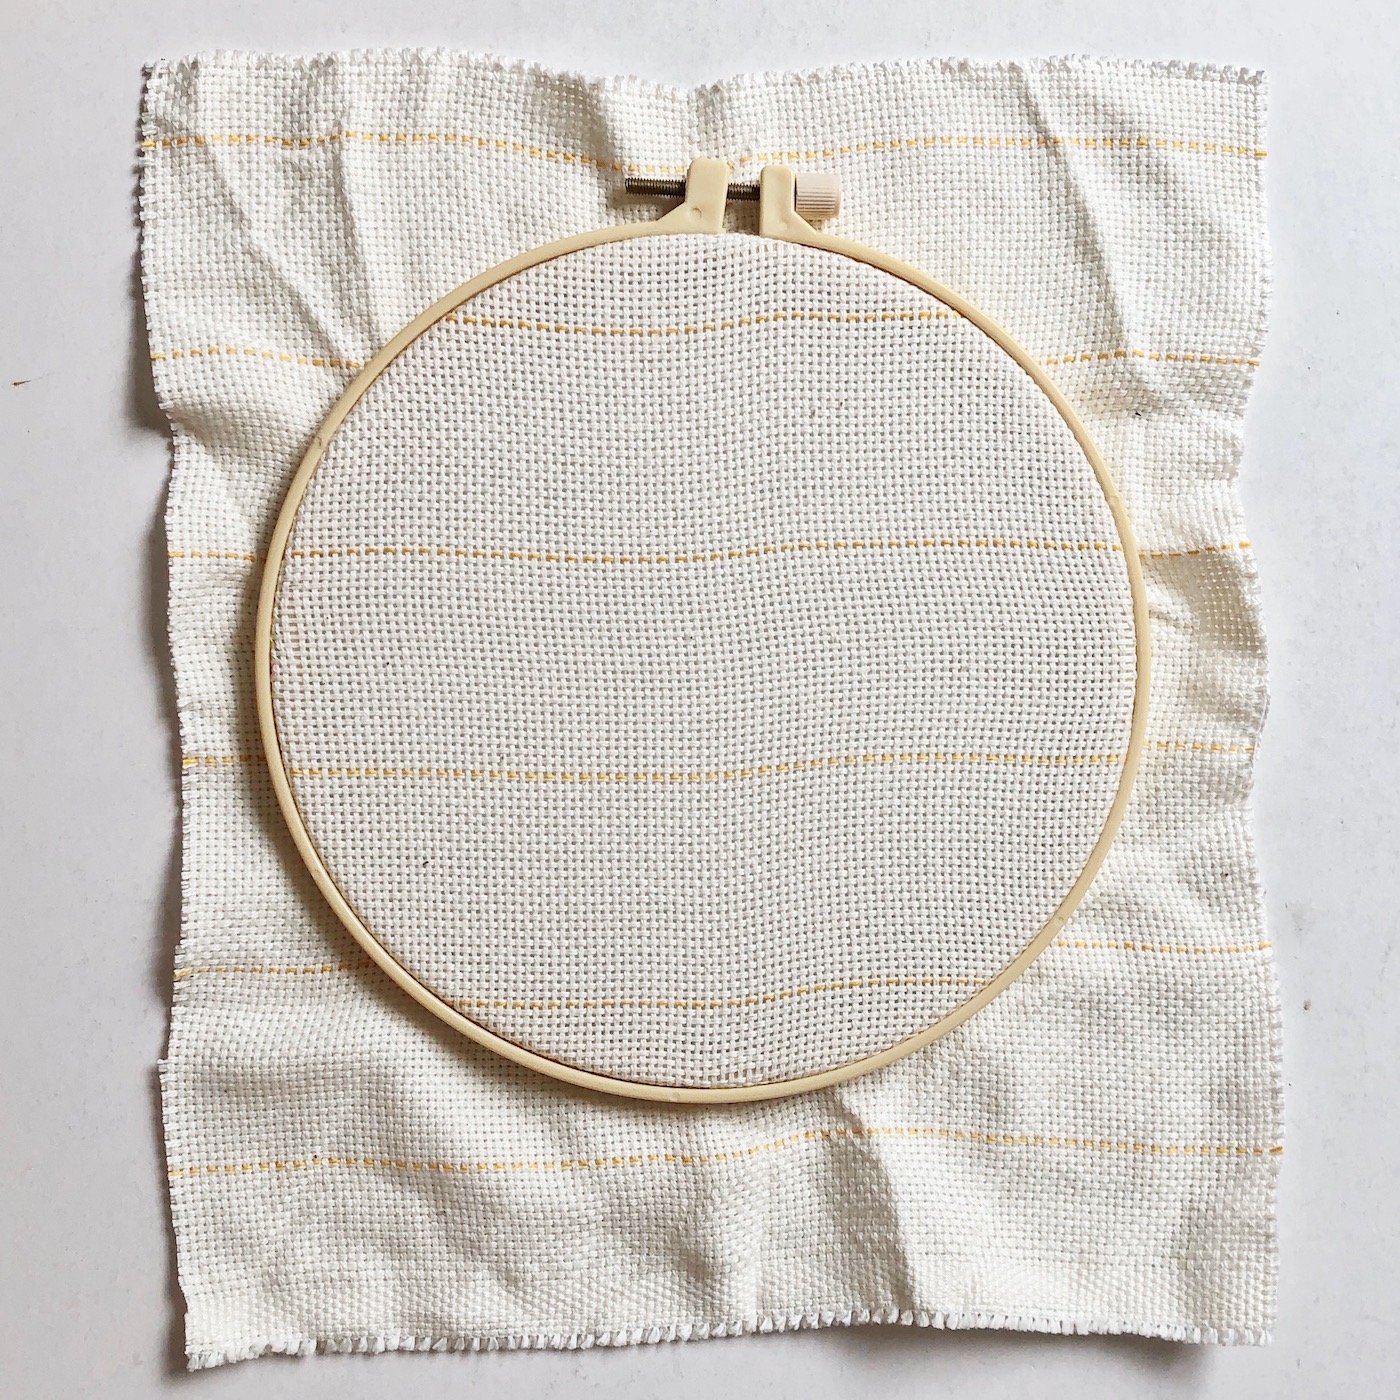 Cloth in an embroidery hoop